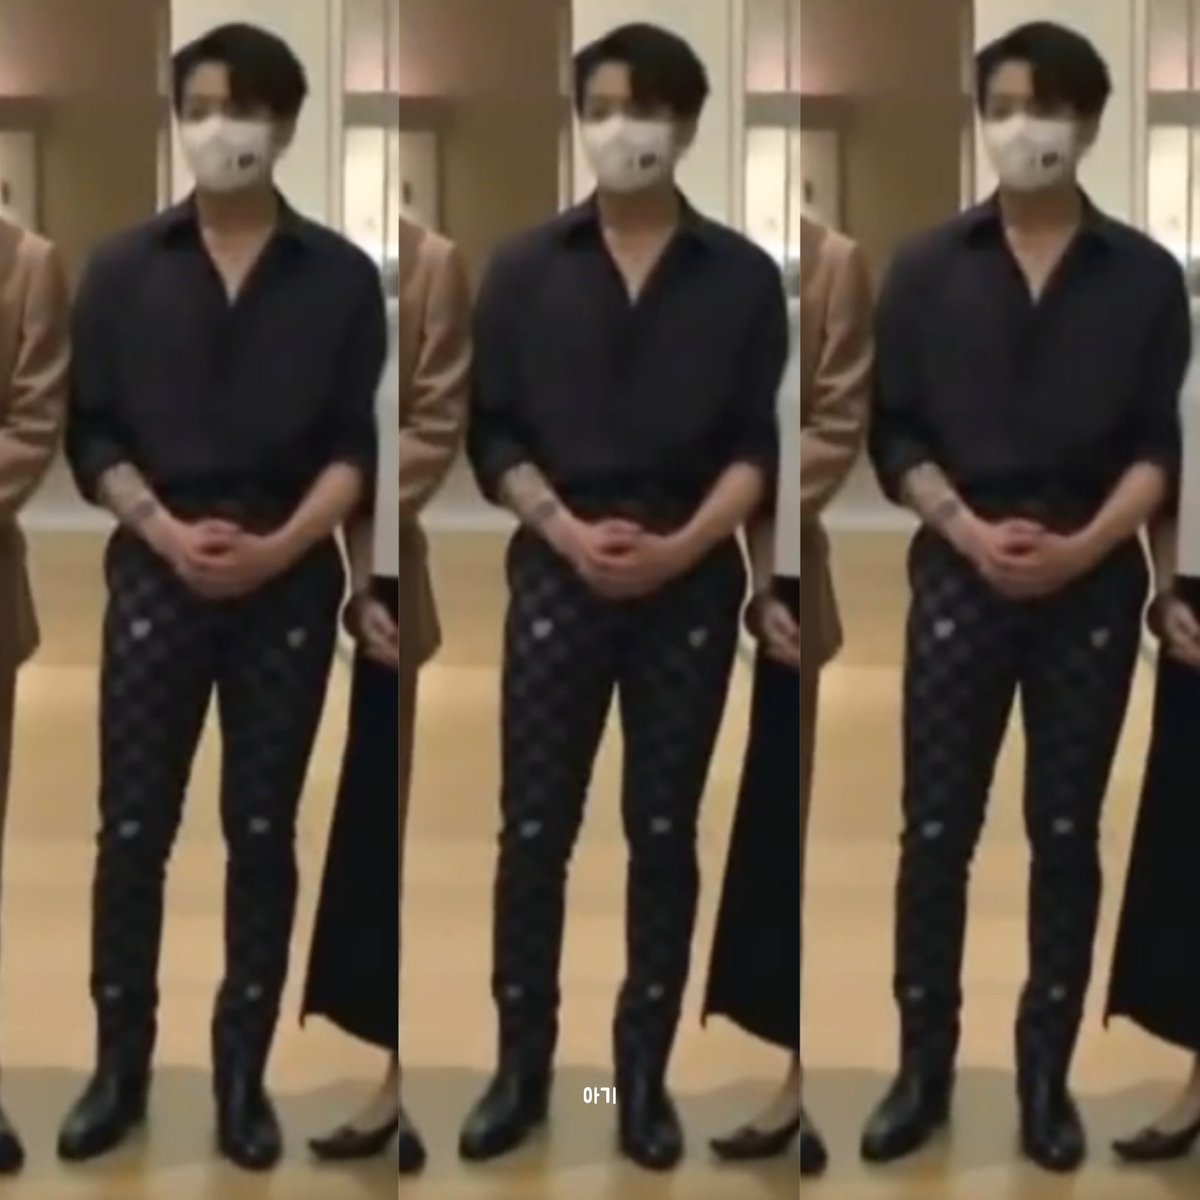 Jungkook⁷ 🥴𝄞 on X: Jeon Jungkook's LOUIS VUITTON PANTS GOING VIRAL AFTER  HE WORE THEM!!!! I swear ?!!?HE IS THE HOTTEST 😳😵🔥 #Jungkook #jk #BTS  @BTS_twt  / X